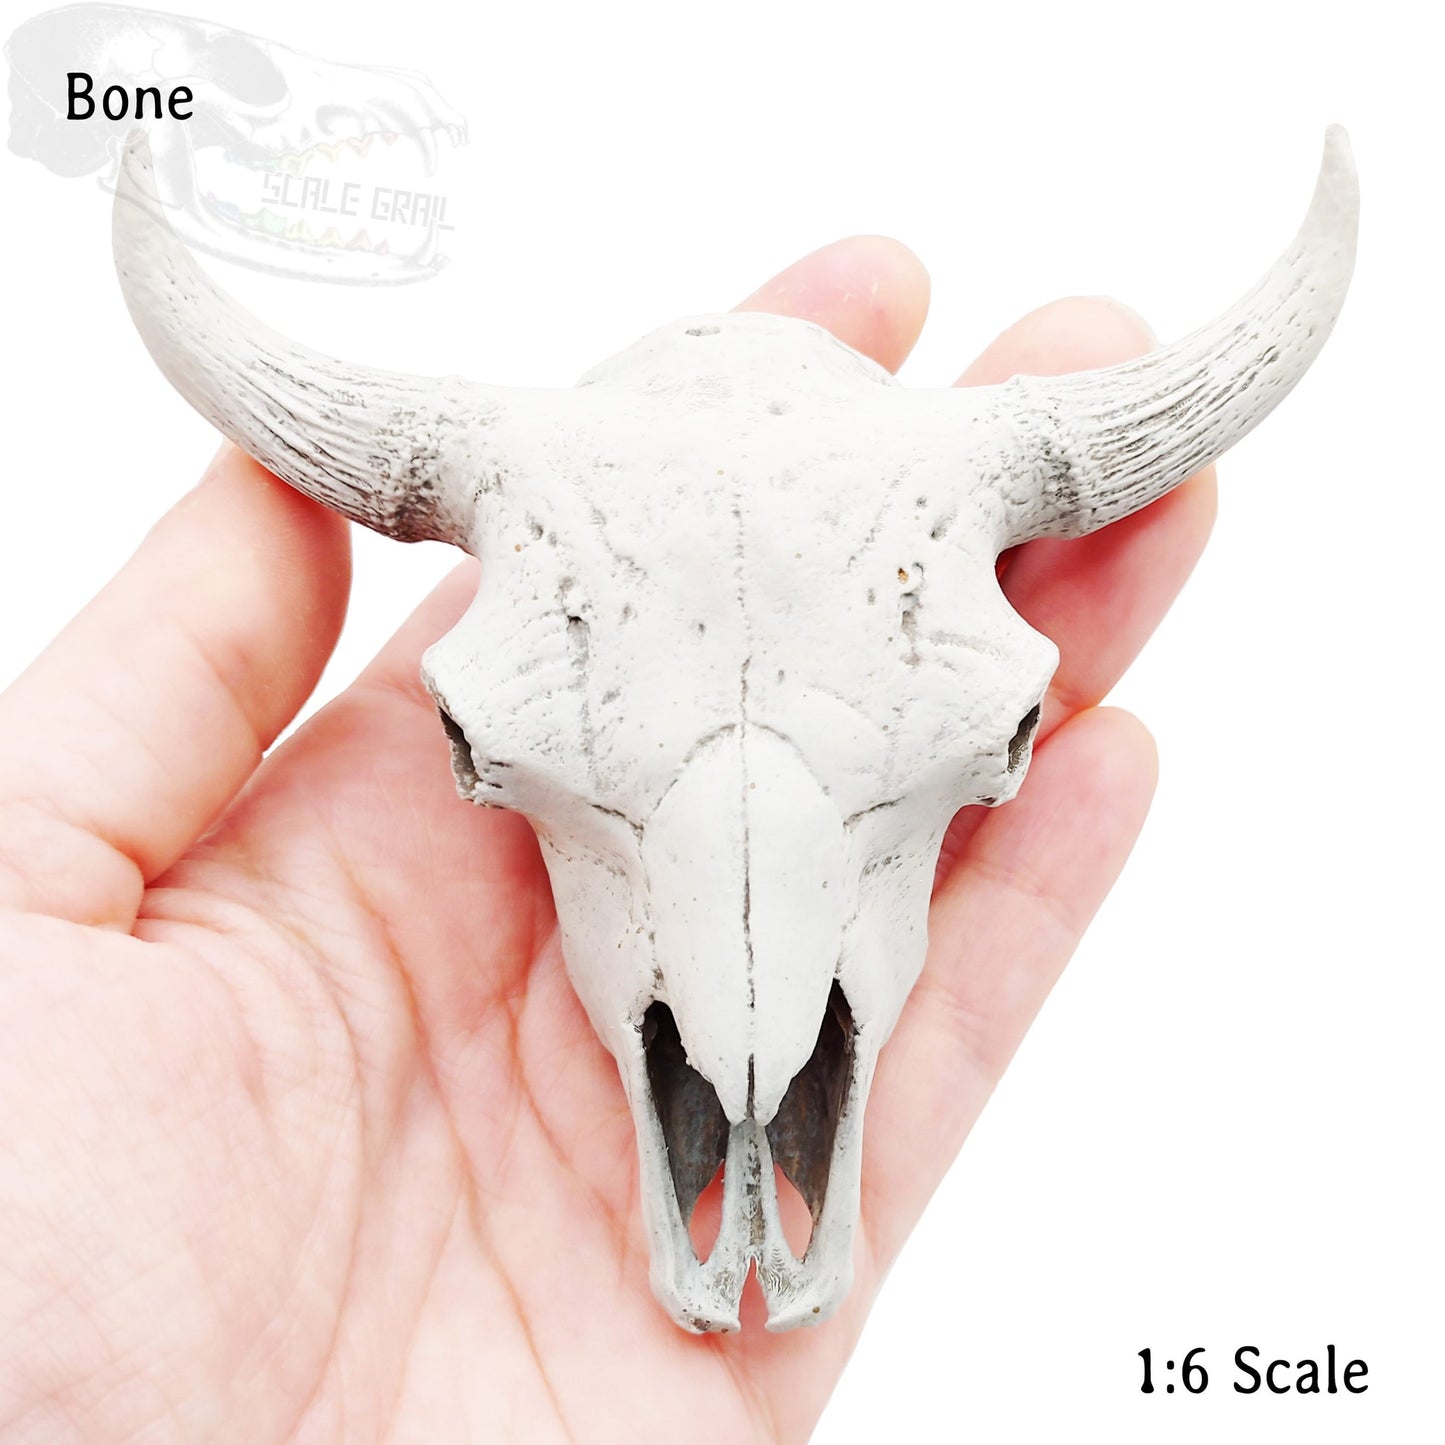 American Bison Skull Replica- 1:6 scale size for home desert decoration, curio cabinet, arts and crafts, miniature oddities (1 skull)